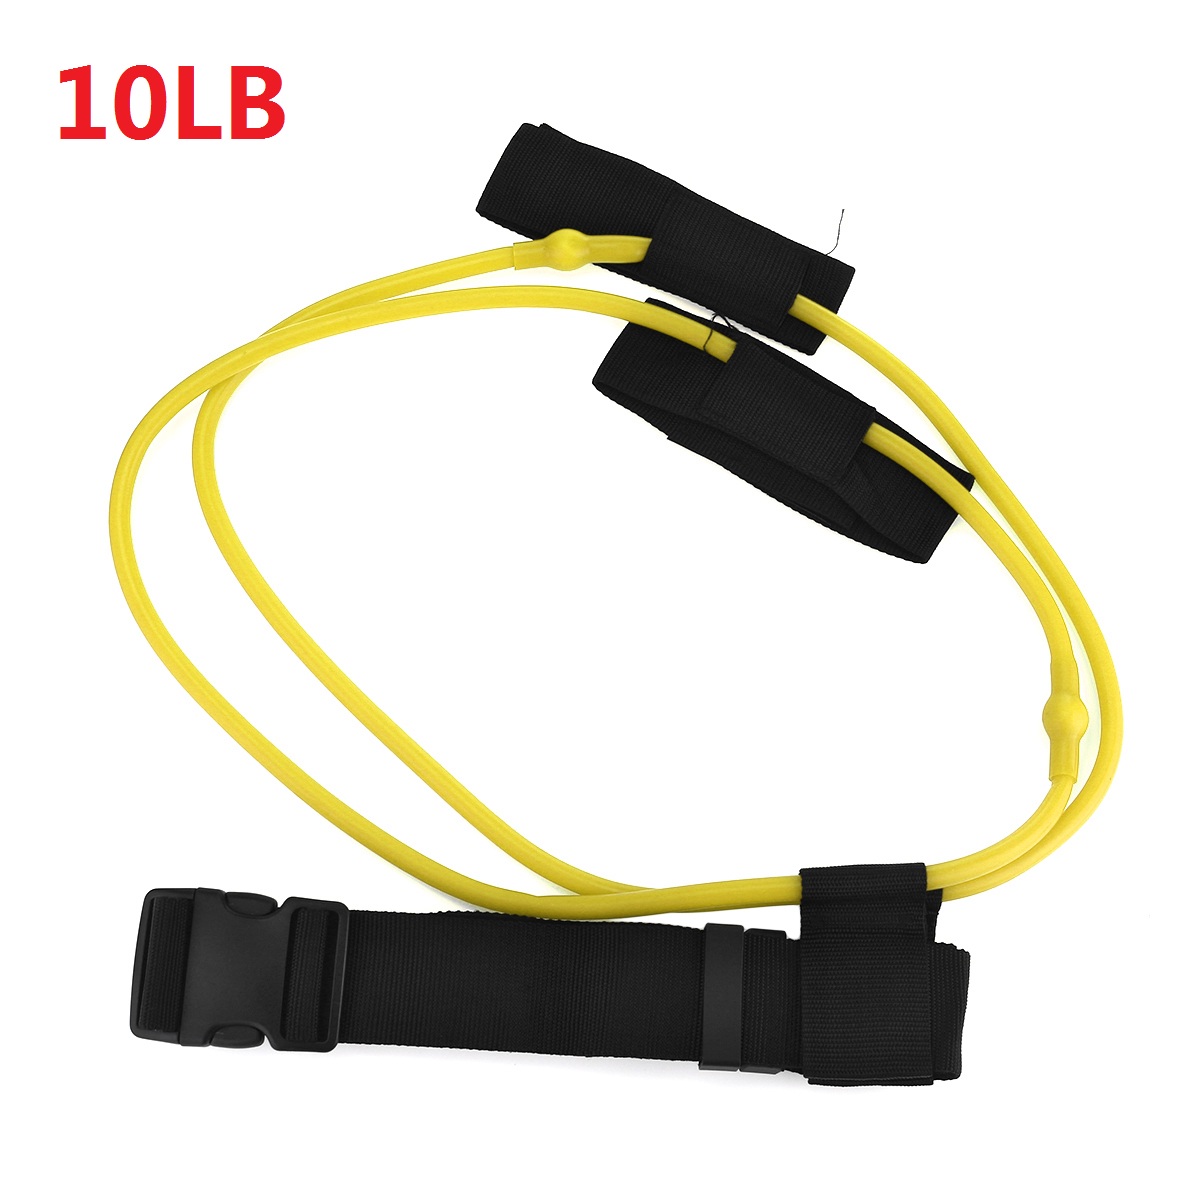 10-40lbs-Pedal-Resistance-Band-Women-Hip-Trainer-Belt-Band-Gum-Workout-Fitness-Bands-Body-Glute-Musc-1697334-6